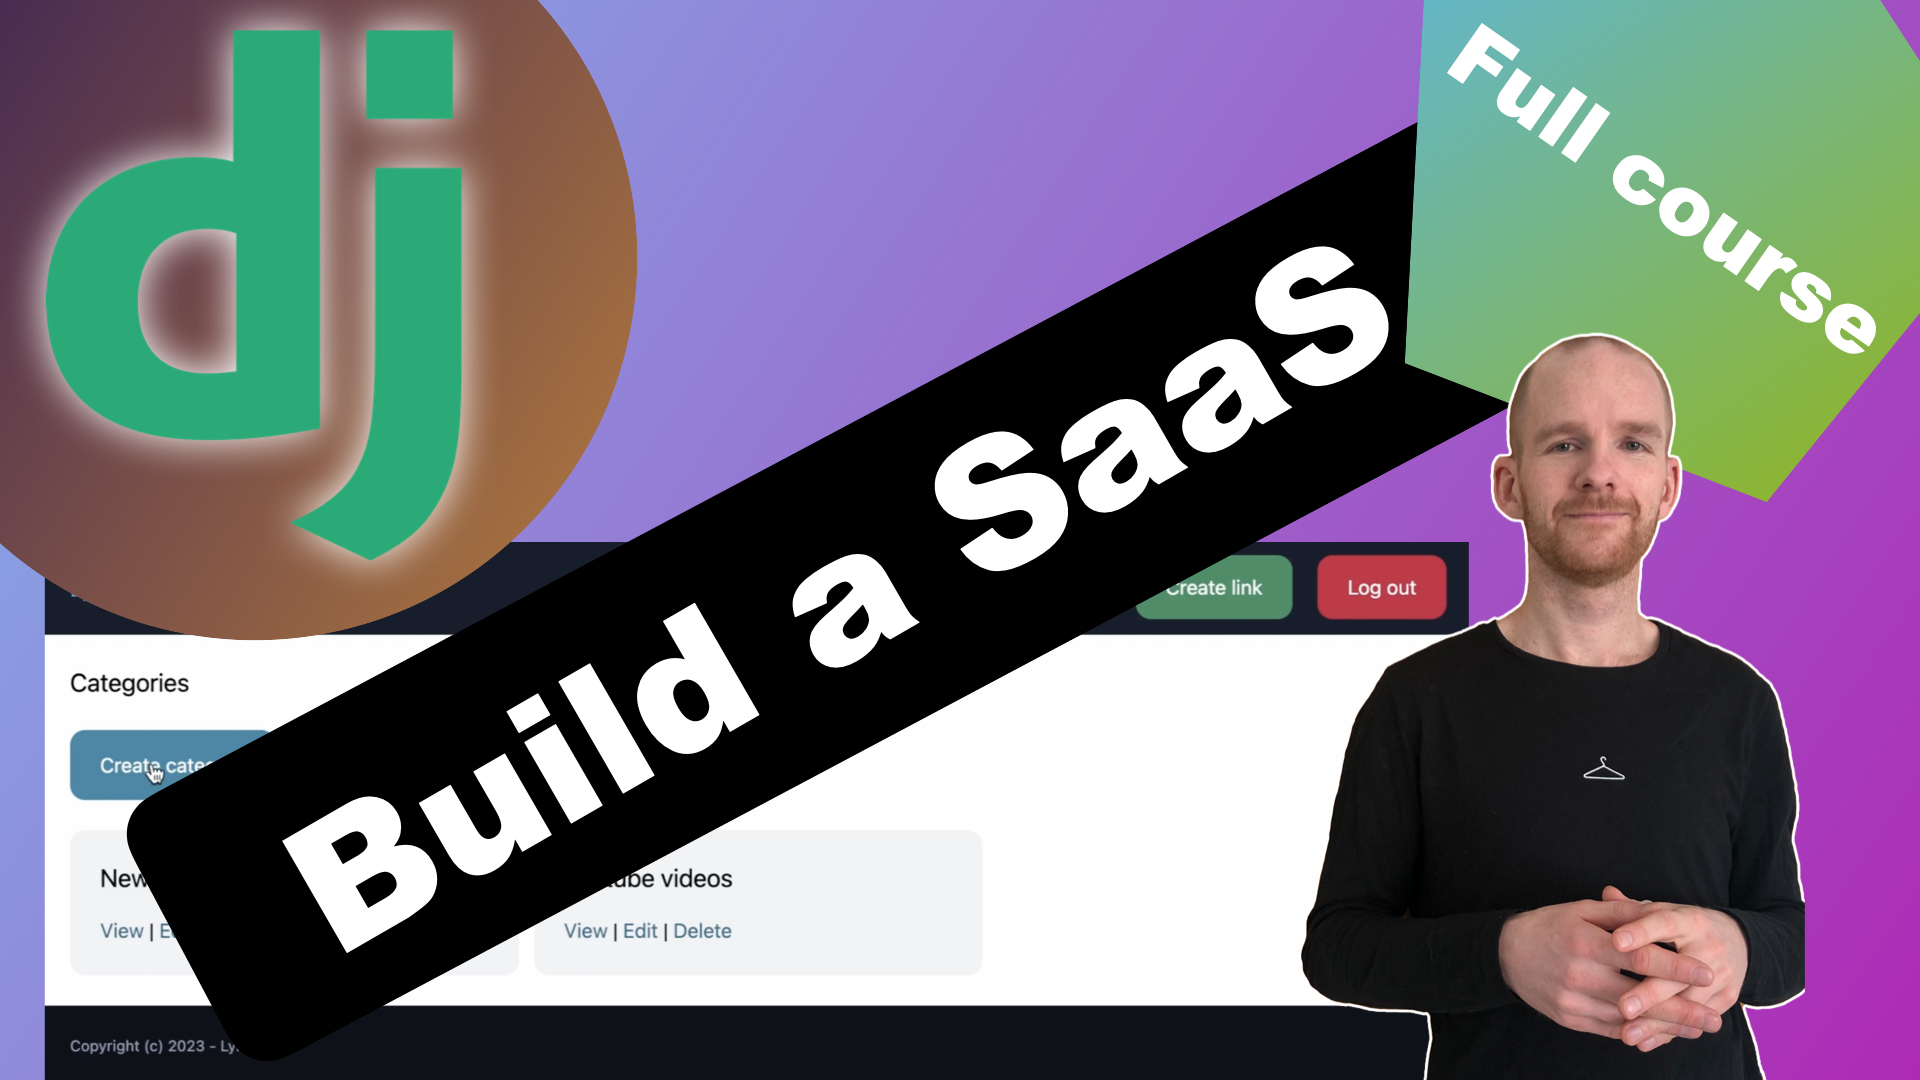 Full Django Course - Build A SaaS From Scratch